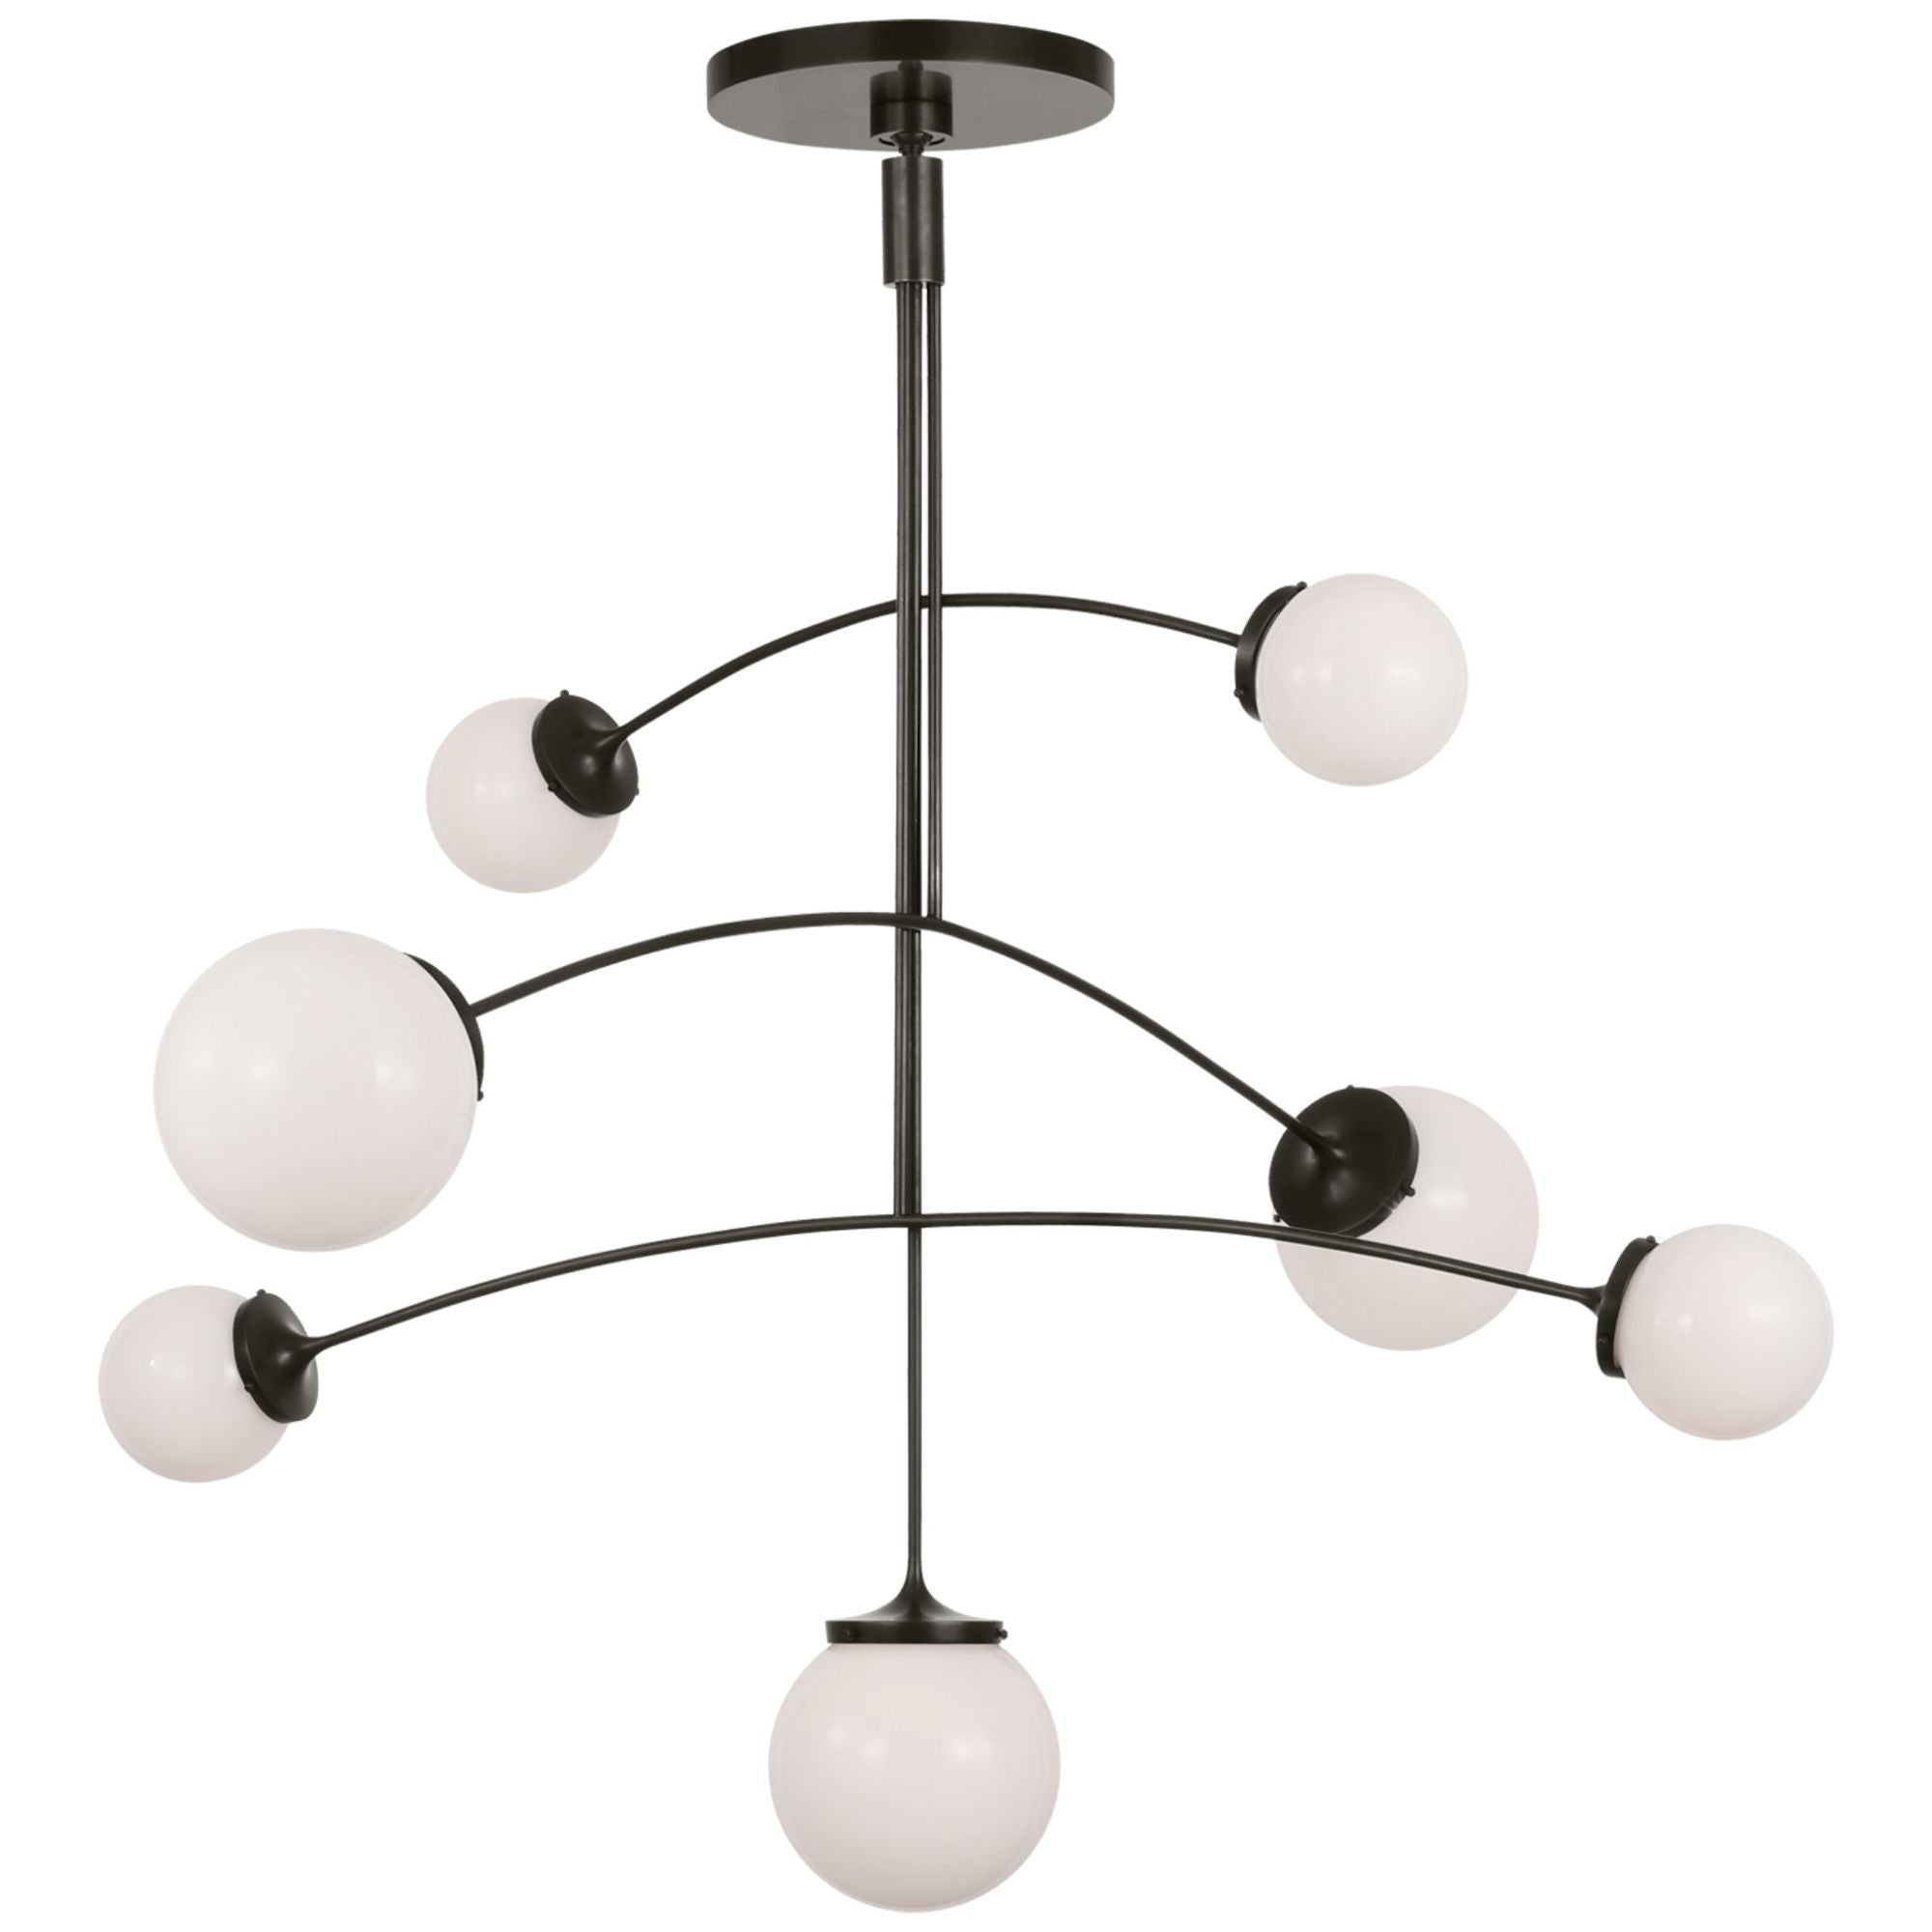 kate spade new york Prescott Large Mobile Chandelier in Bronze with White Glass